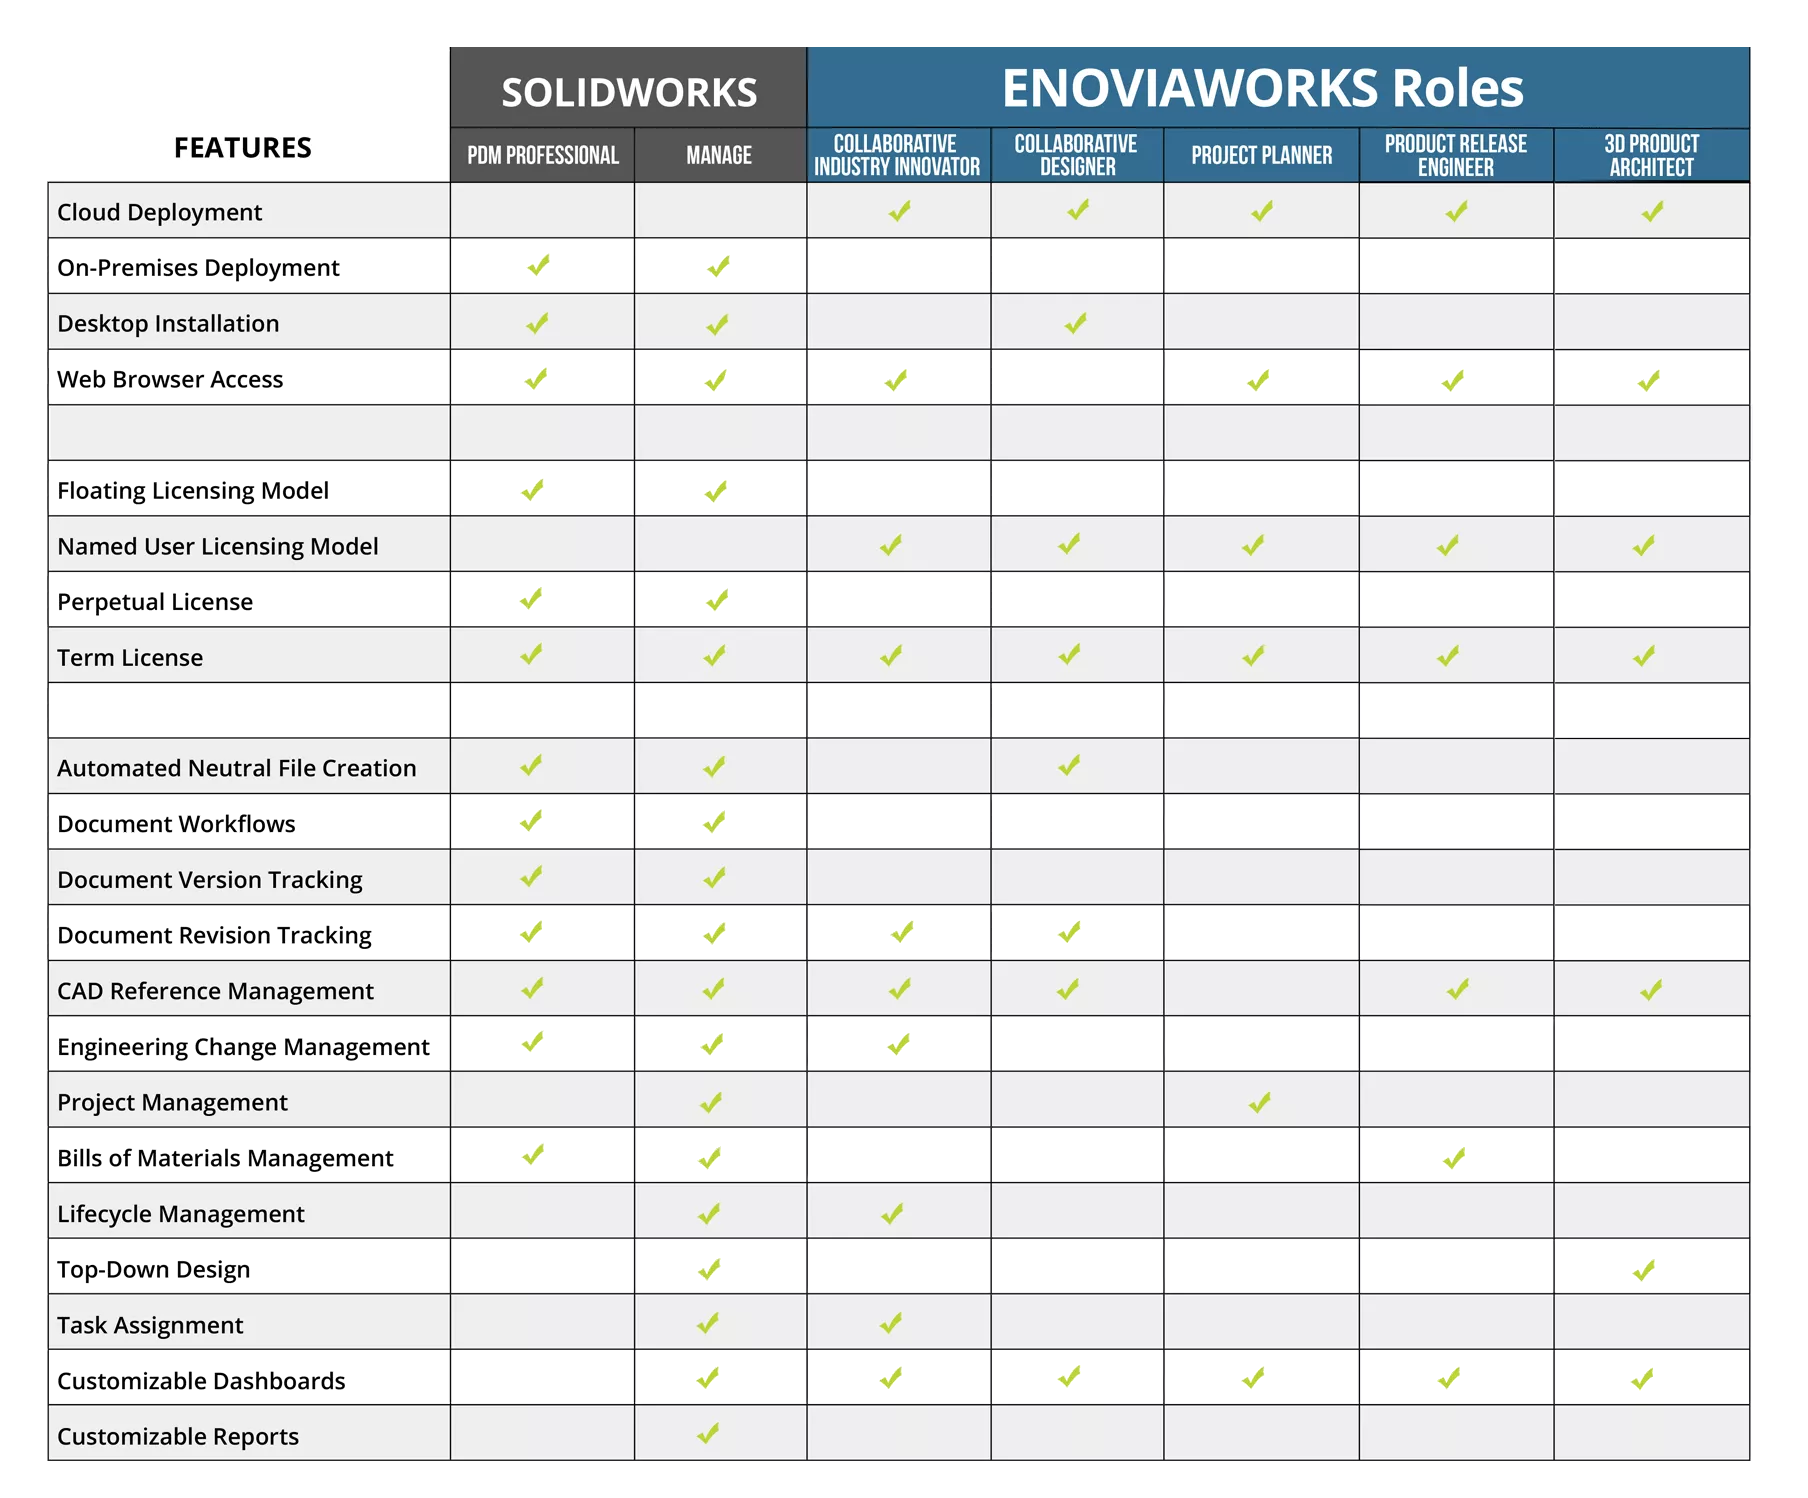 Compare ENOVIAWORKS with SOLIDWORKS PDM